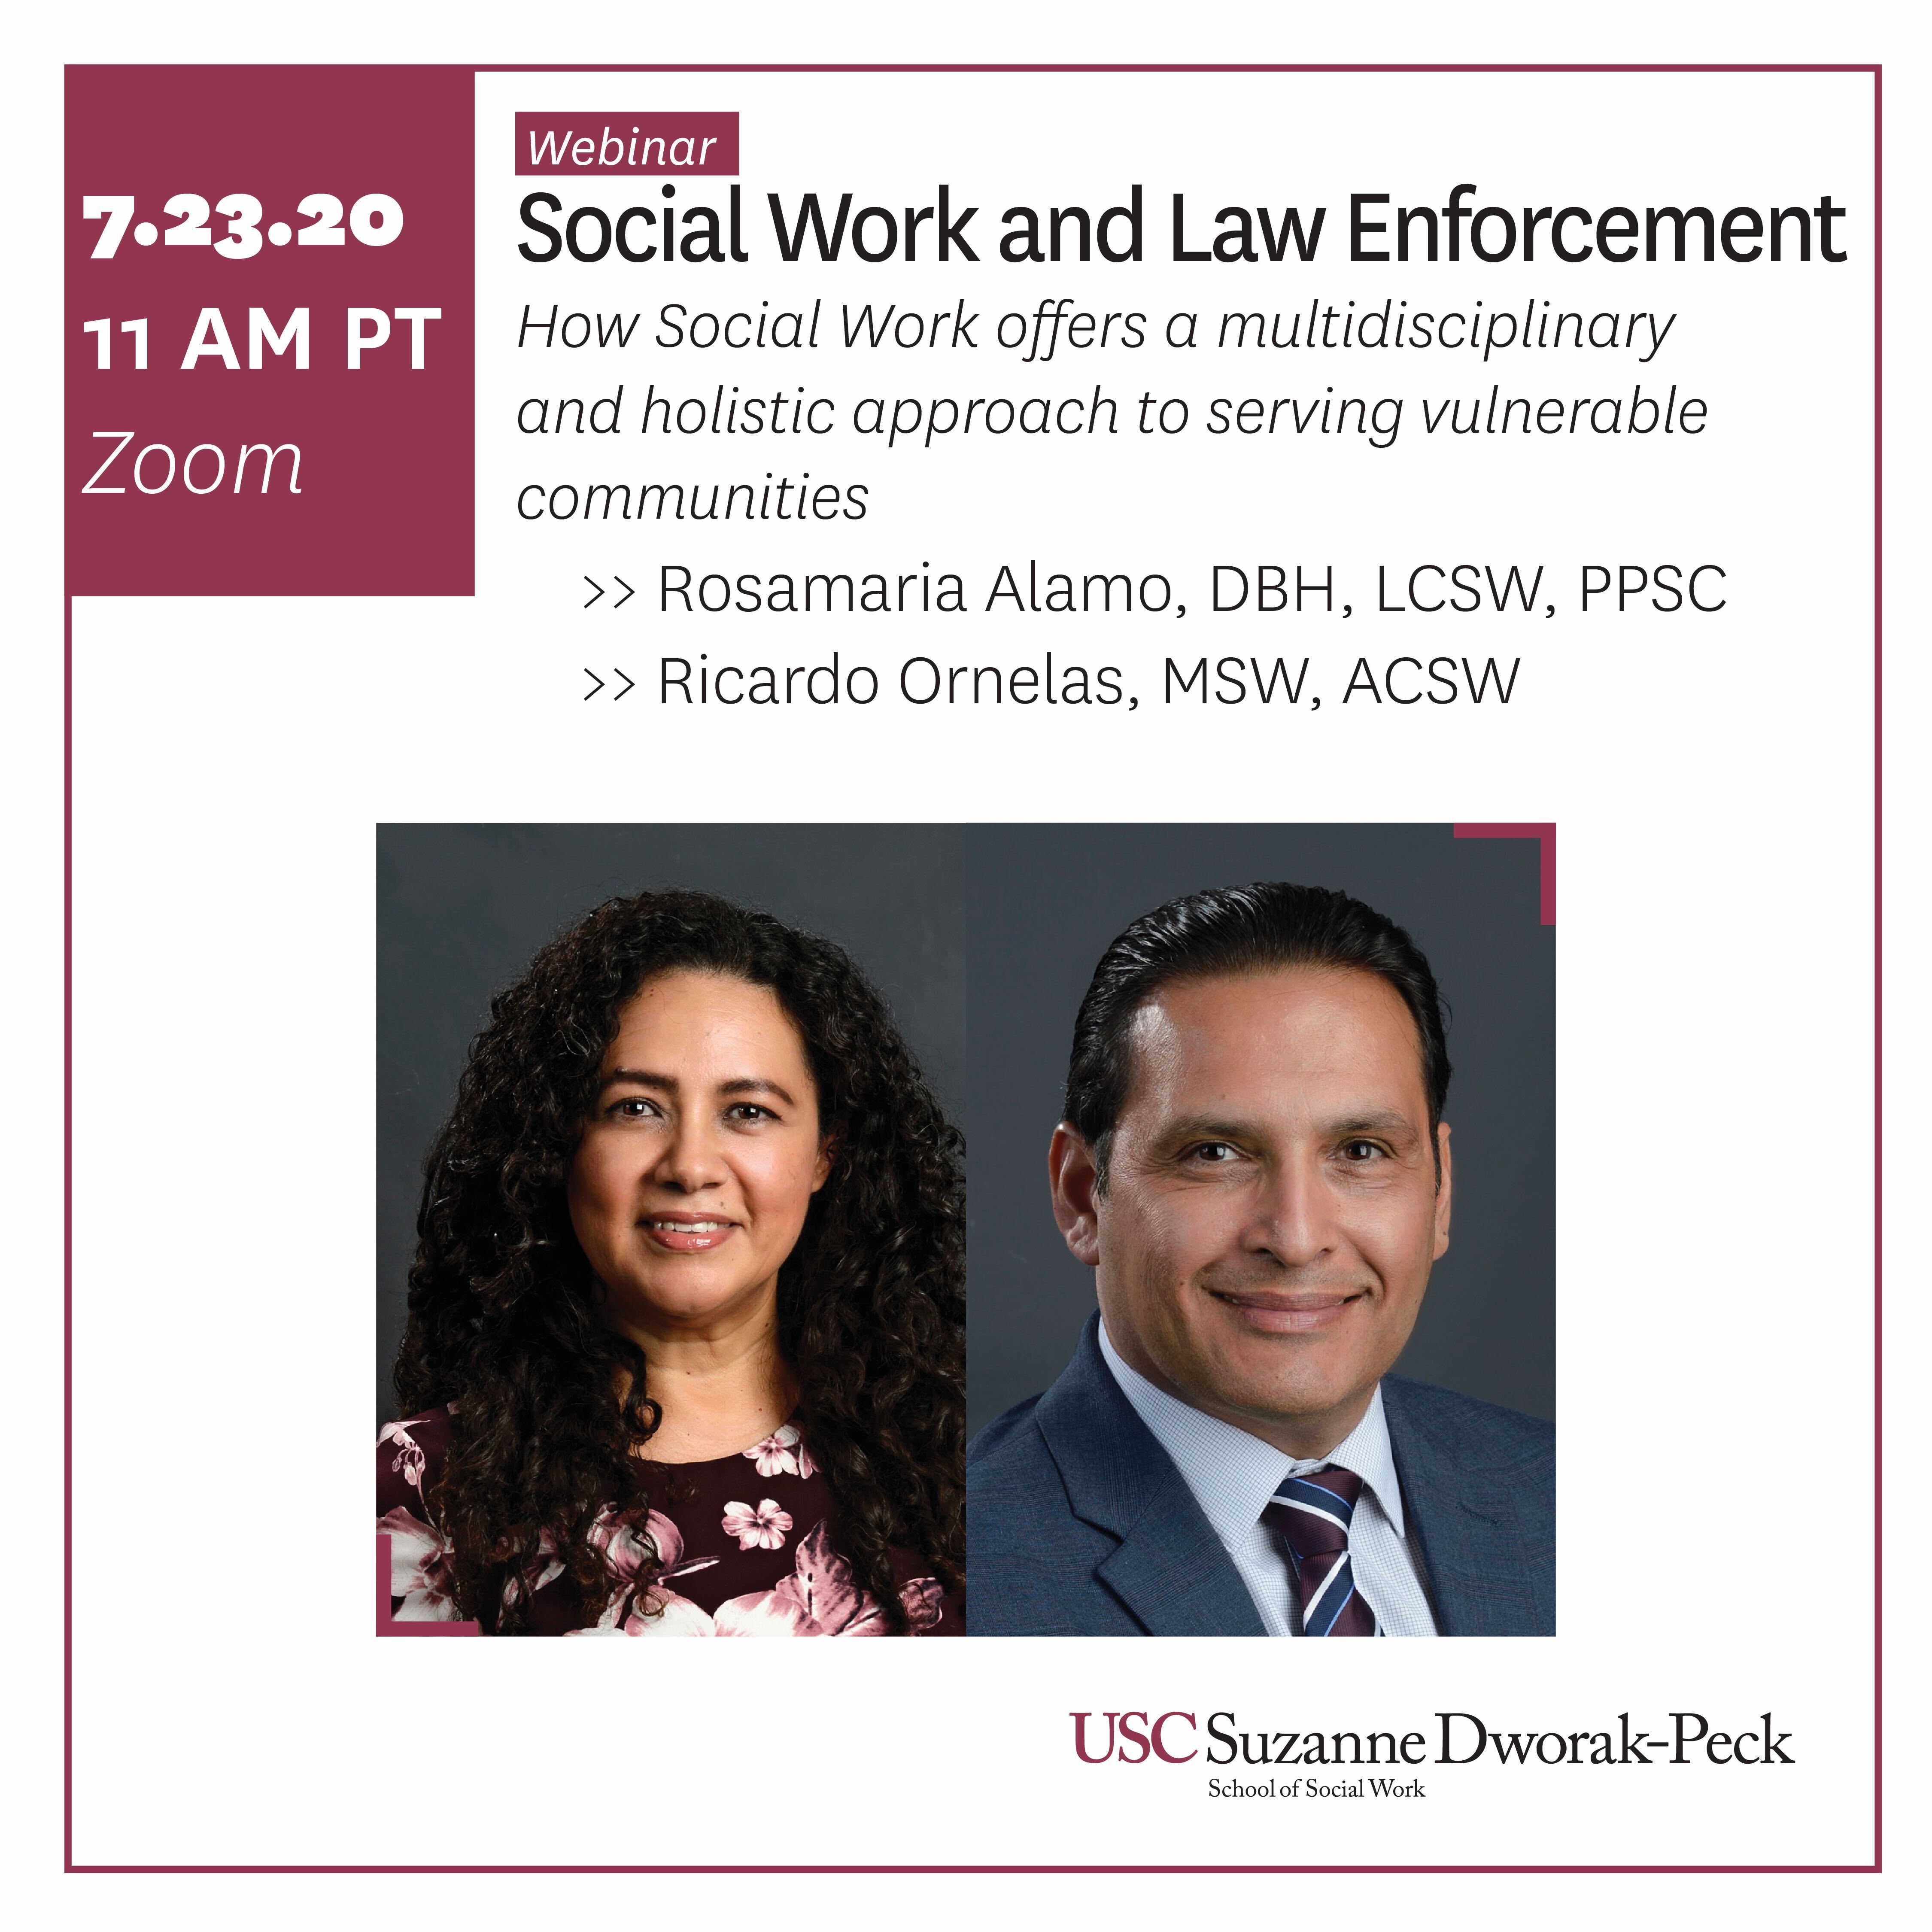 Social Work and Law Enforcement